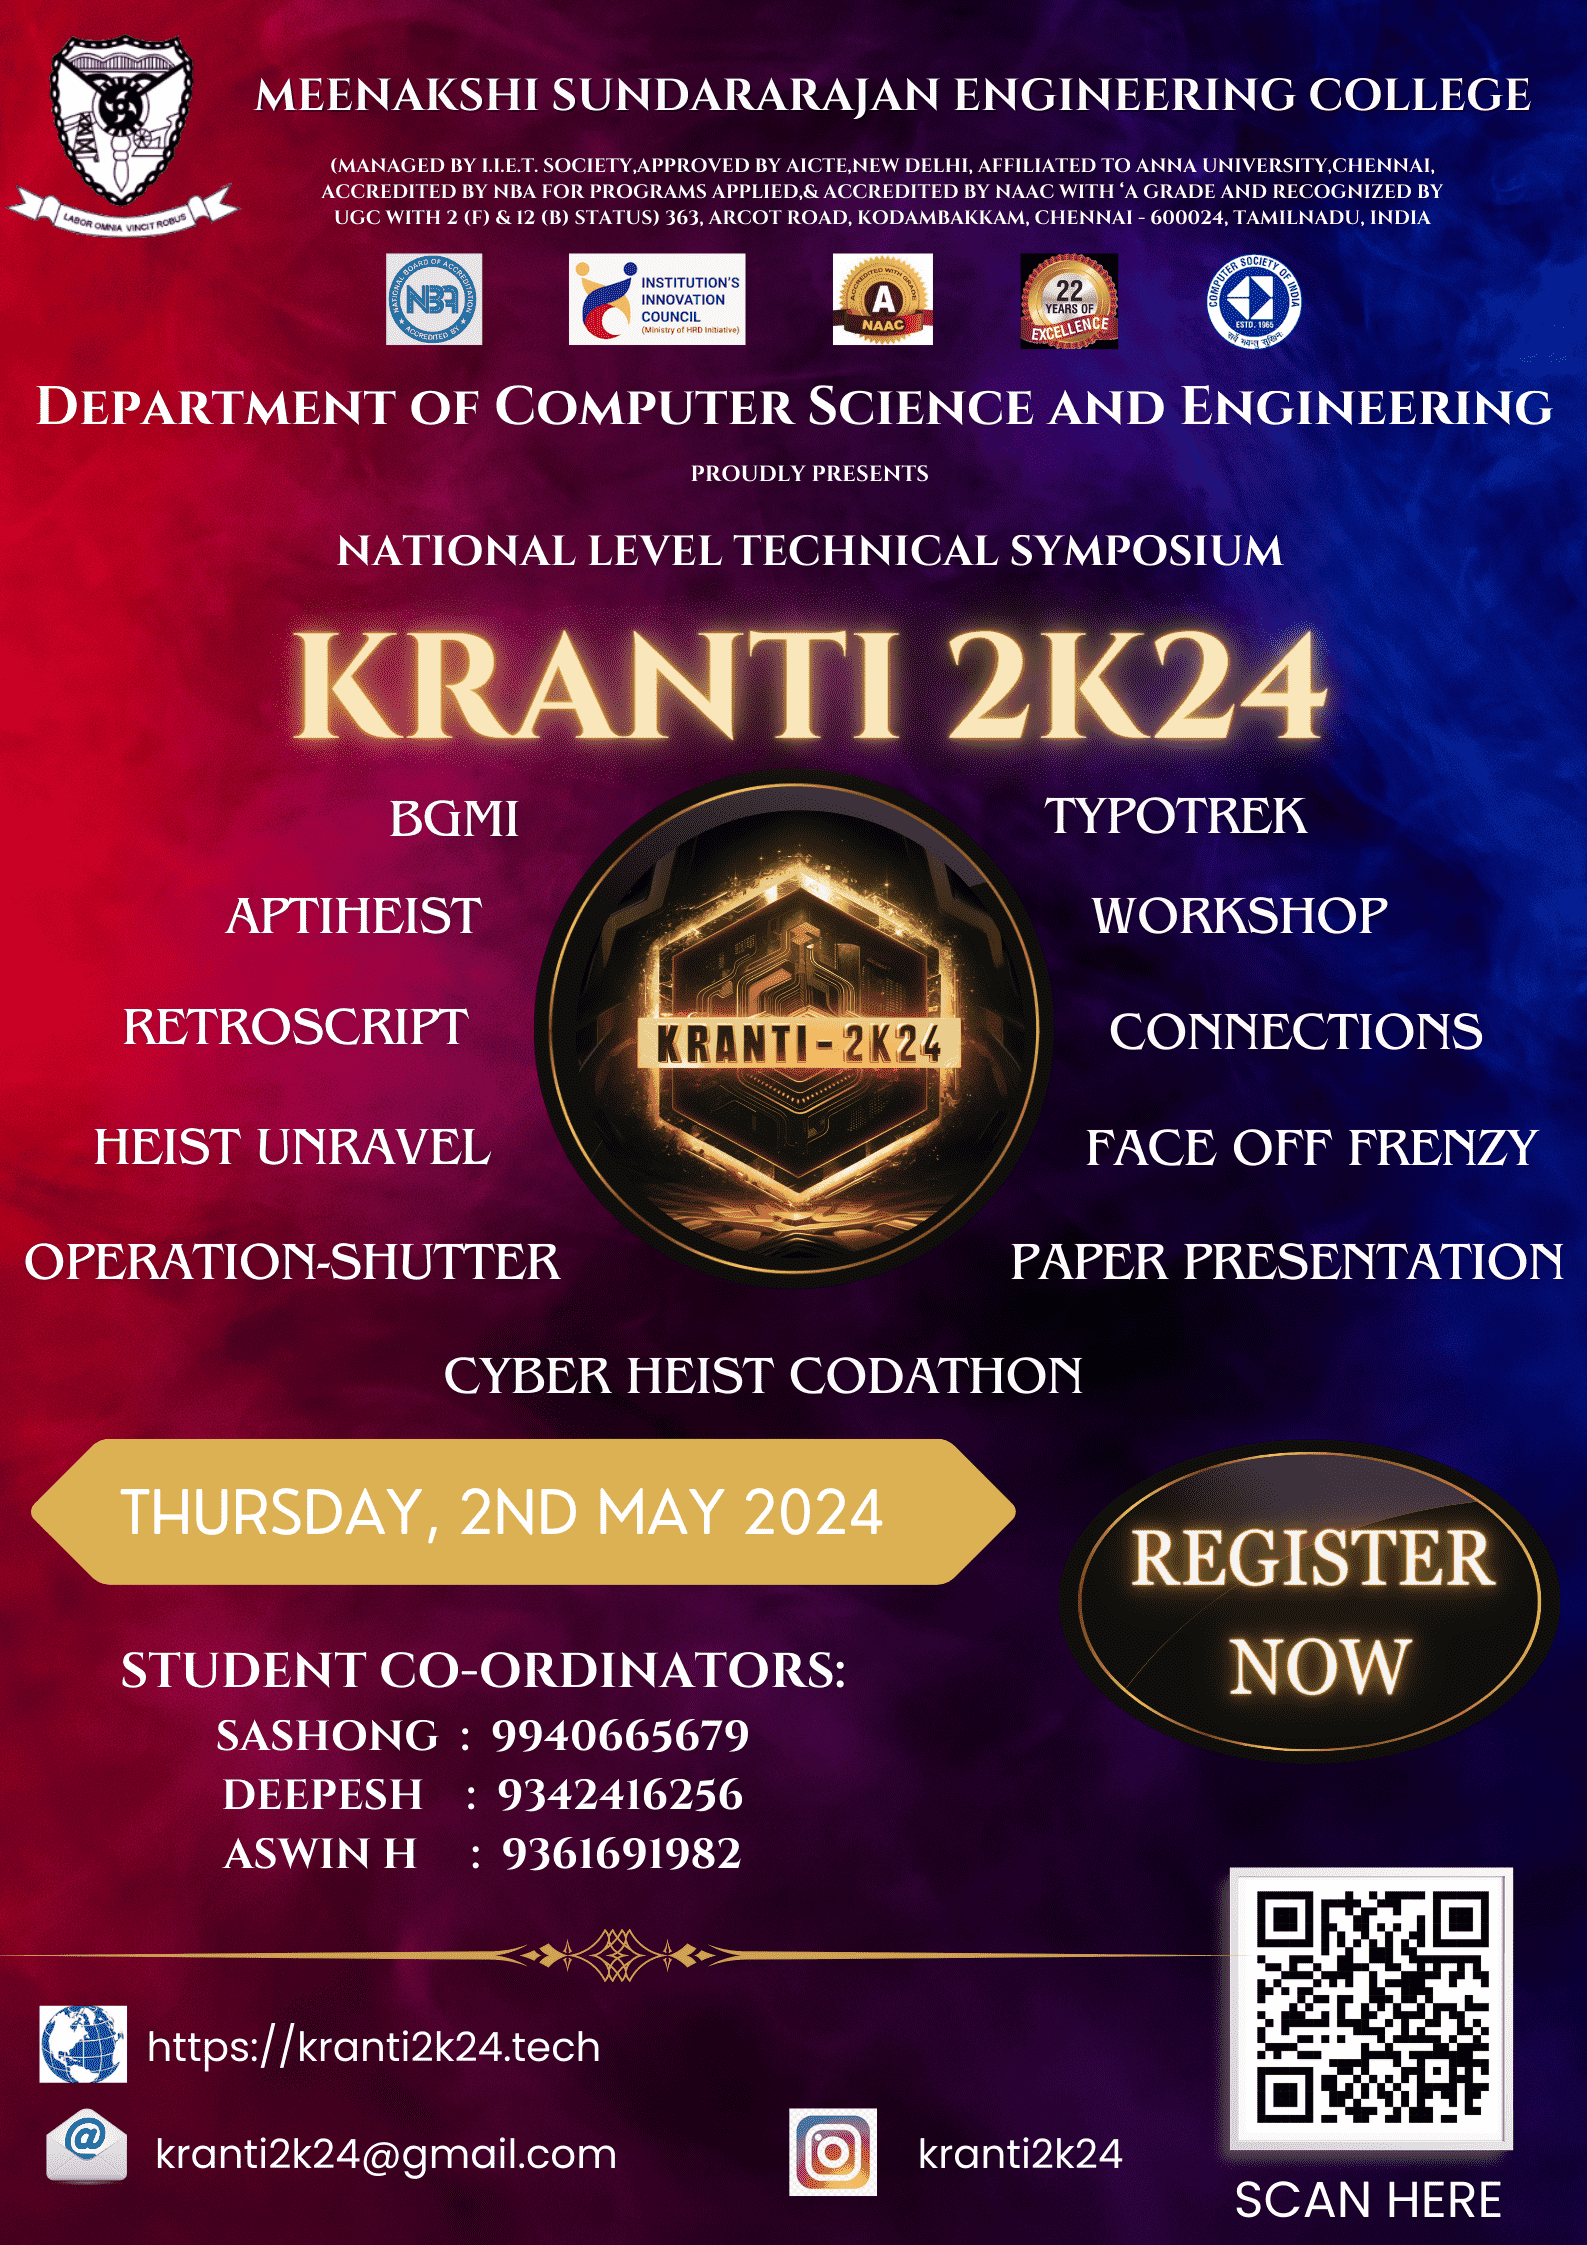 Kranti 2024, the national-level technical symposium hosted by the Computer Science and Engineering Department of Meenakshi Sundararajan Engineering College